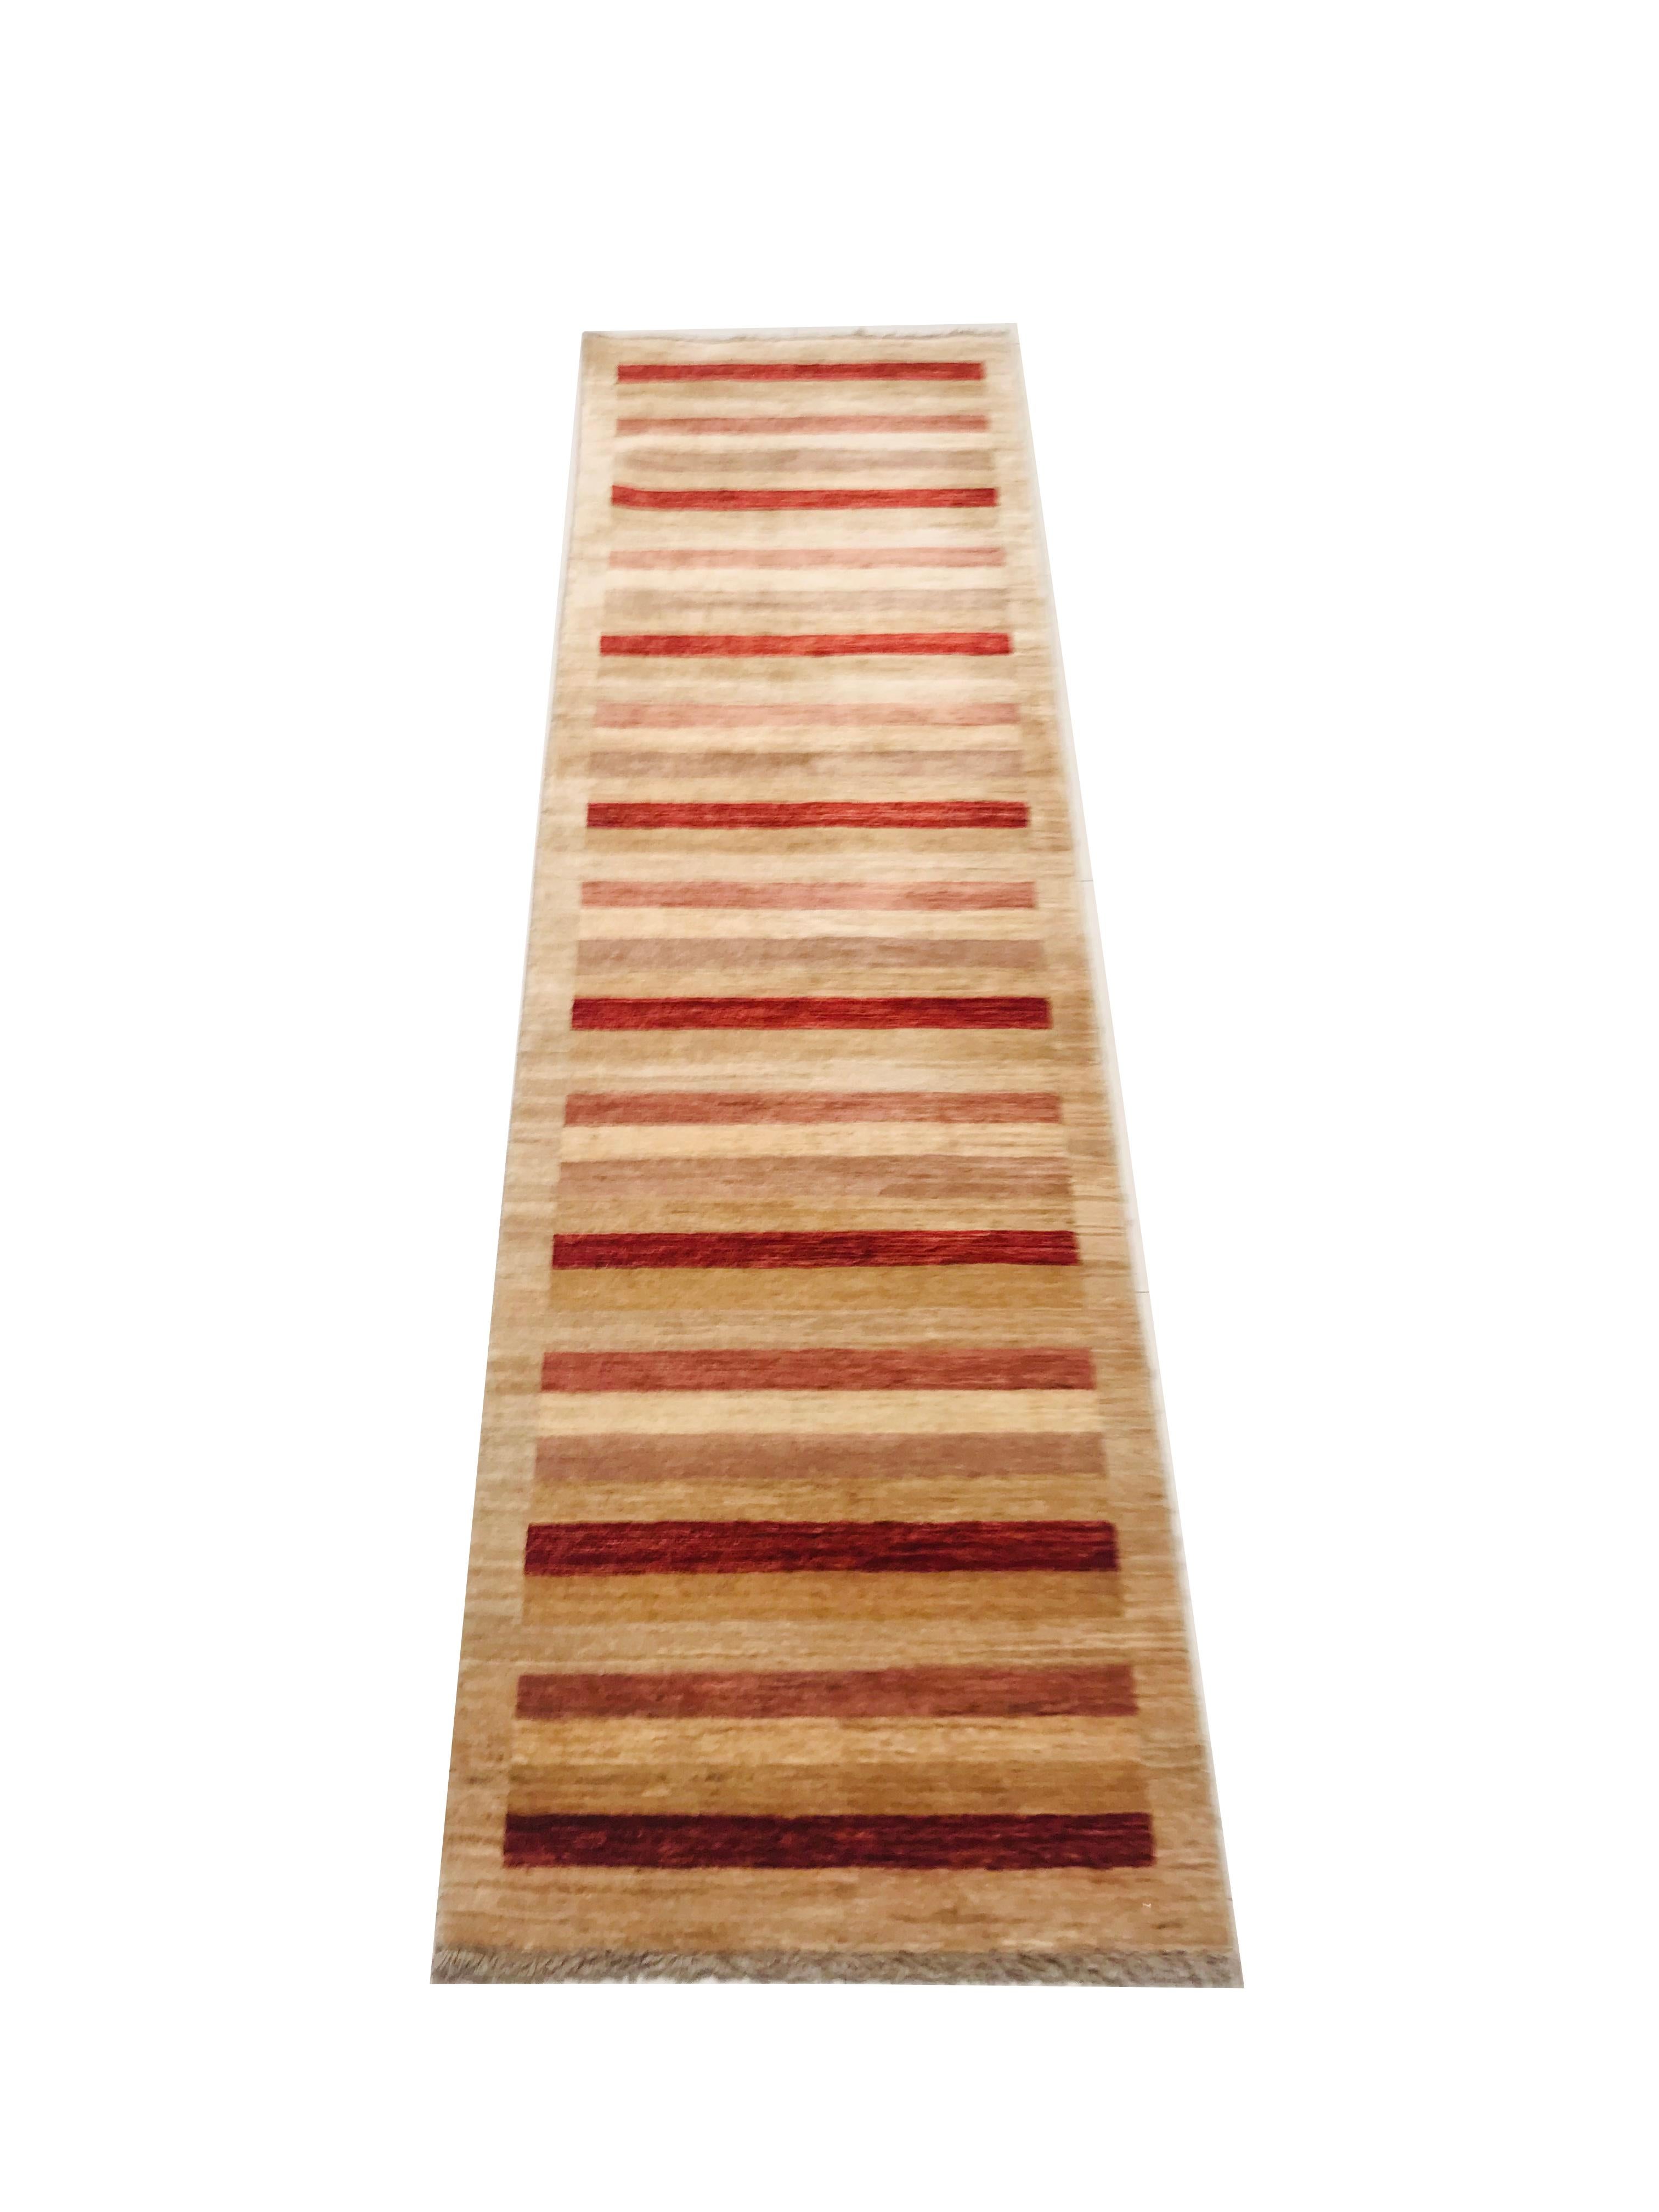 This Pakistan rug is from the 1980s, hand knotted with wool.
This set of carpet has straight lines and a combination of soft colors such as red, yellow and beige that makes it a perfect piece to decorate a corner of our home.